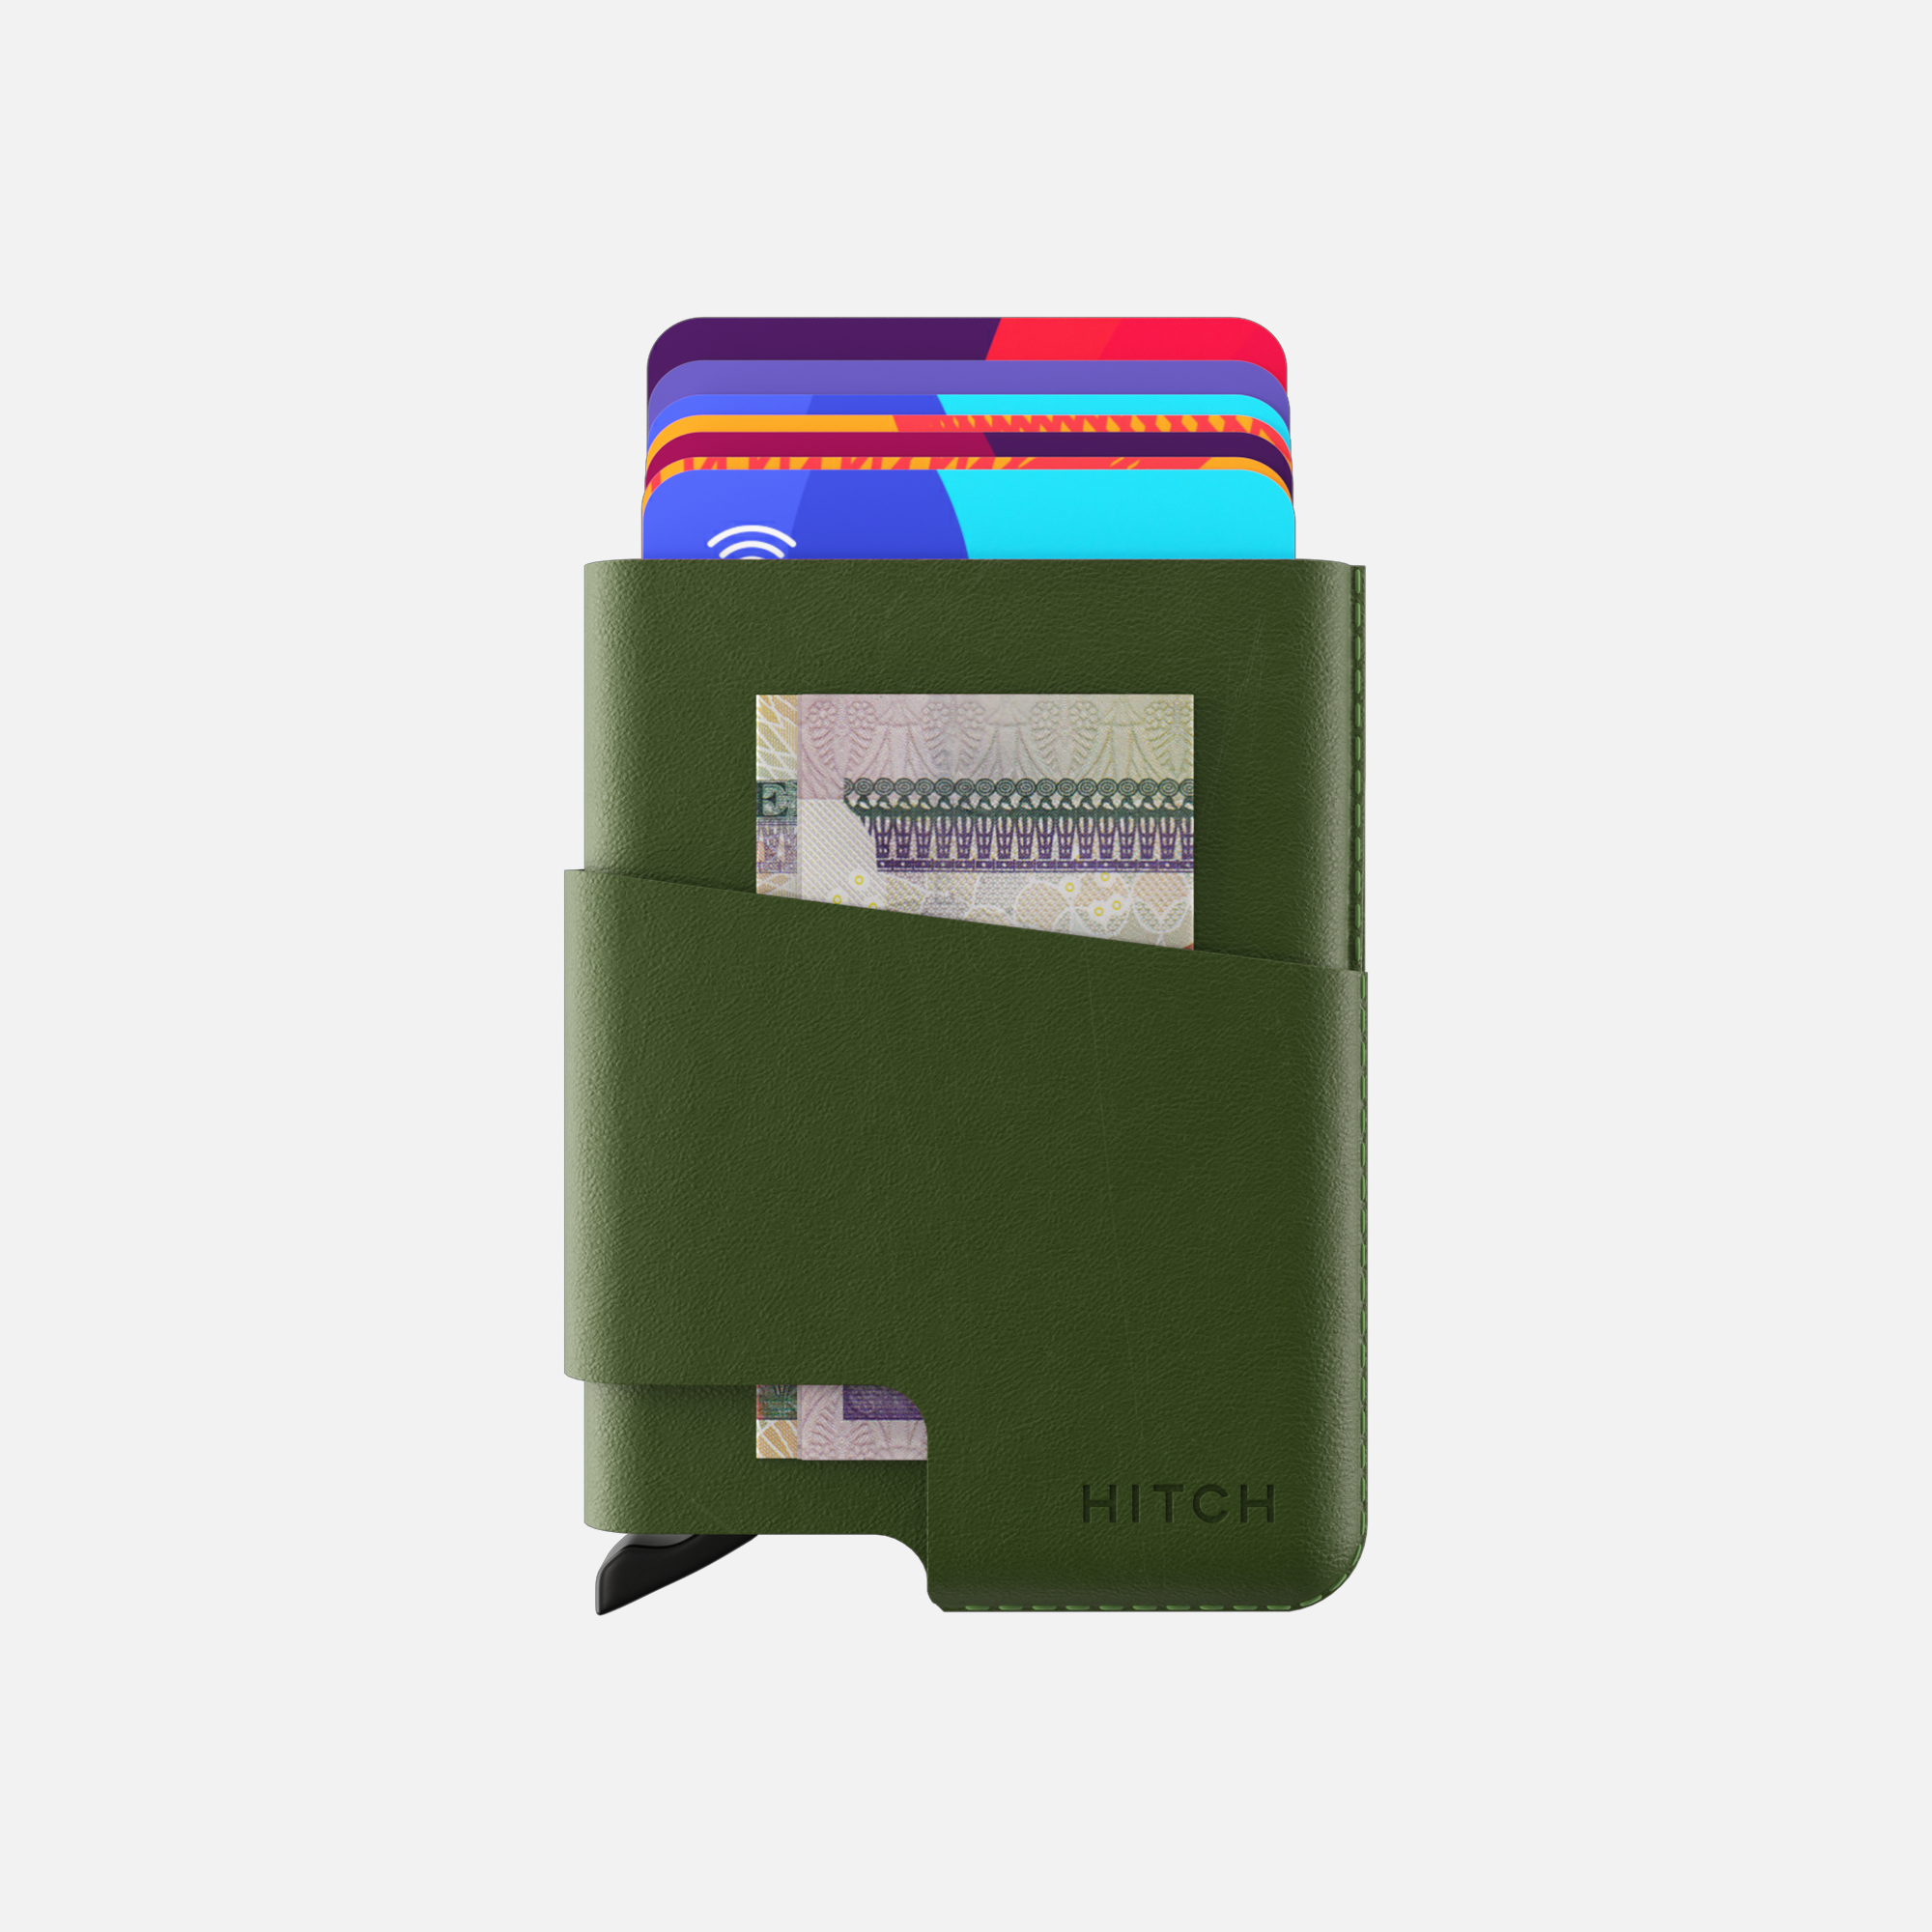 CUT-OUT Cardholder - RFID Block Featured - Handmade Natural Genuine Leather - Green